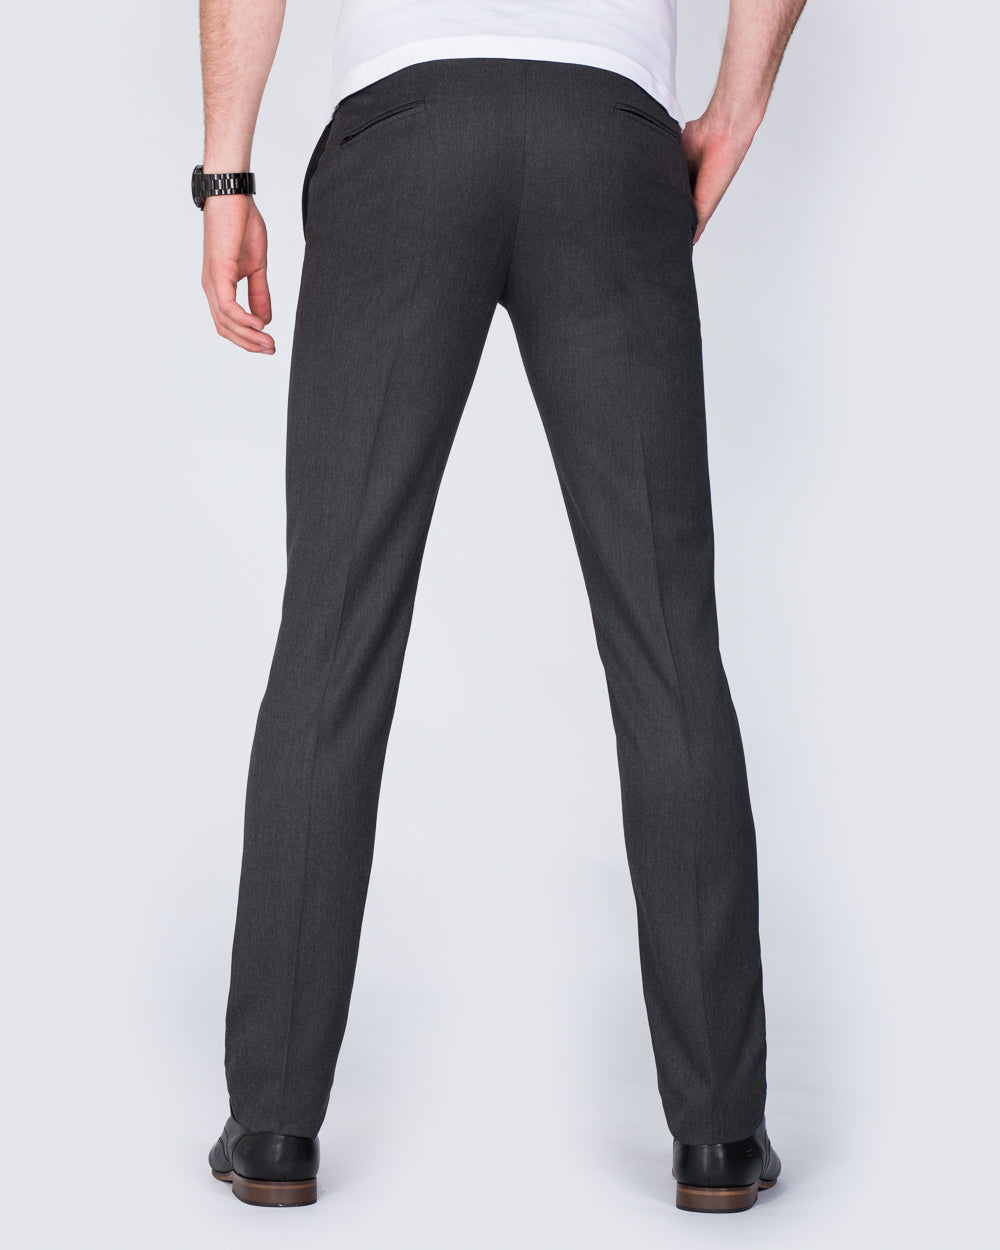 Carabou Slim Fit Tall Trousers (grey)